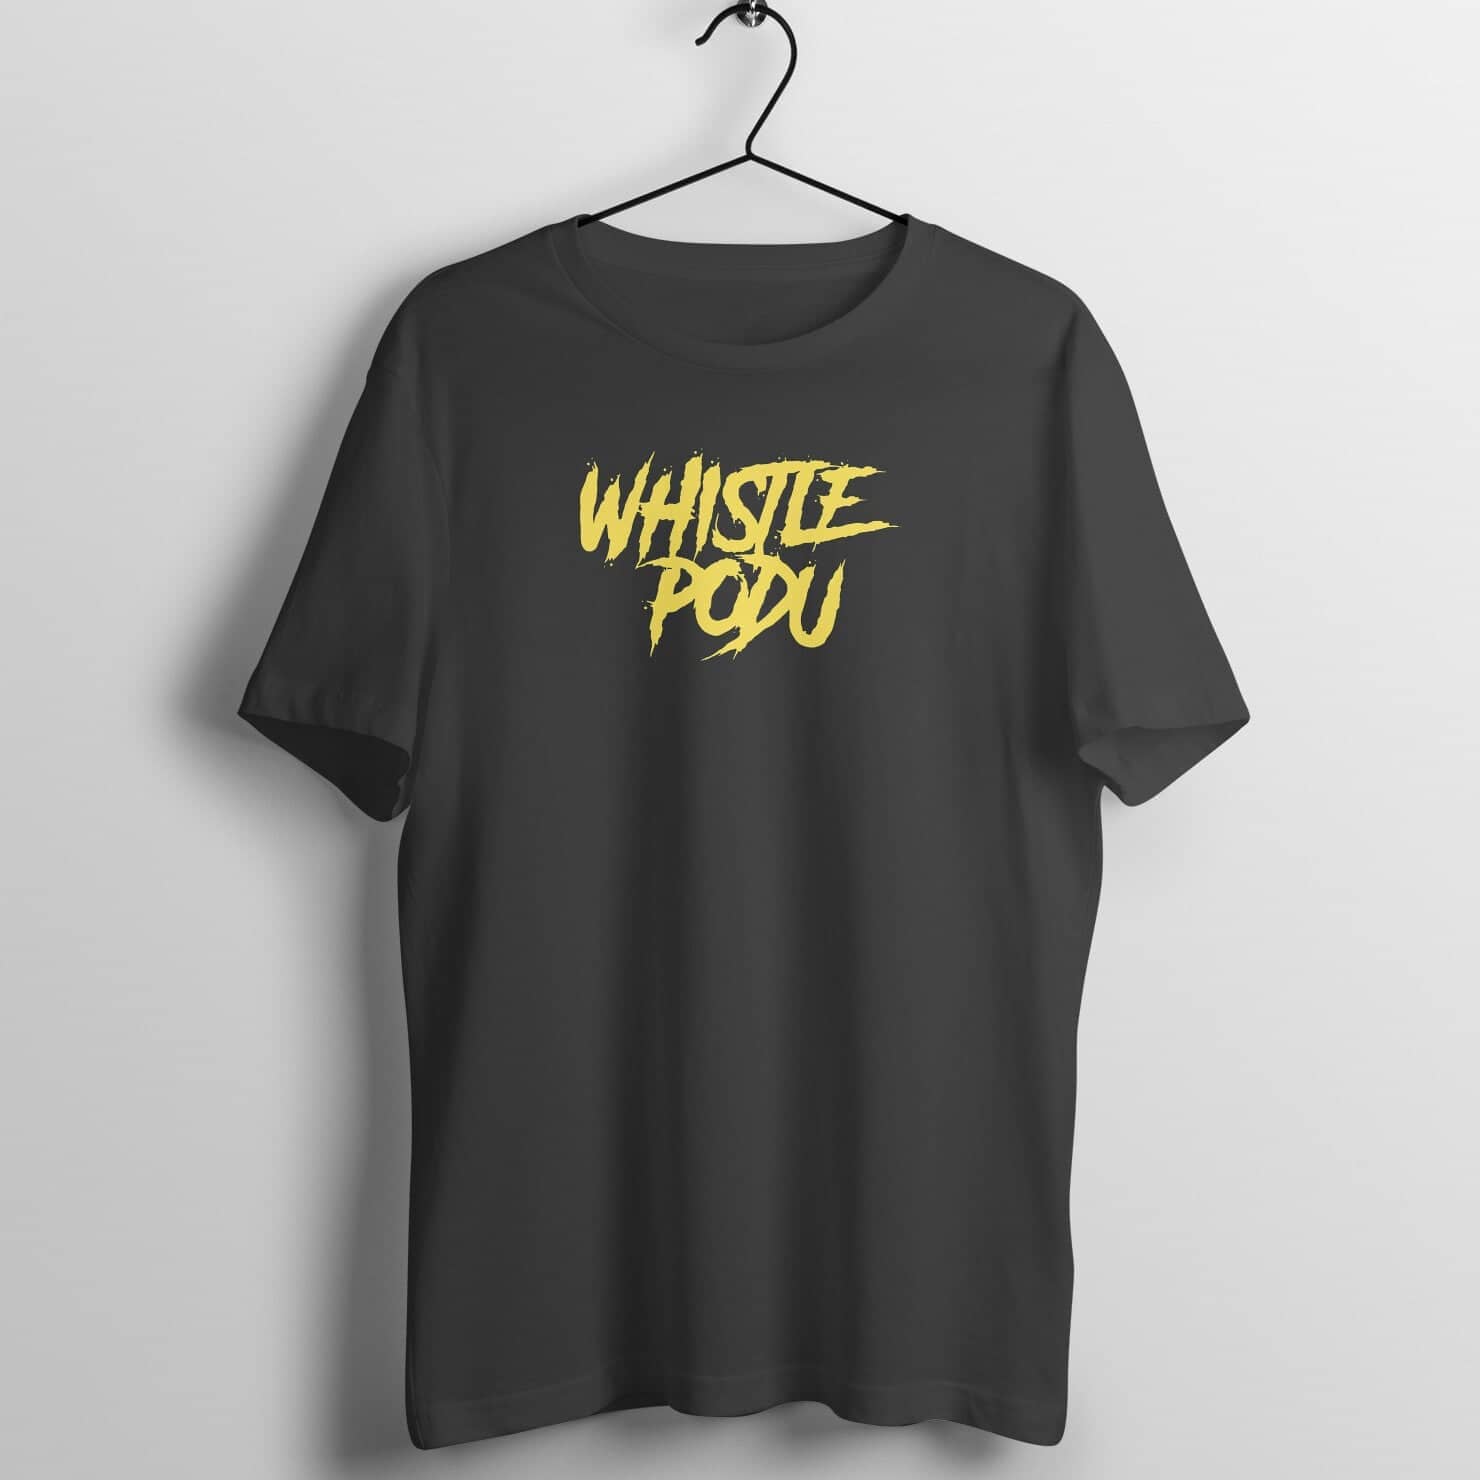 Whistle Podu Exclusive Black T Shirt for Men and Women freeshipping - Catch My Drift India